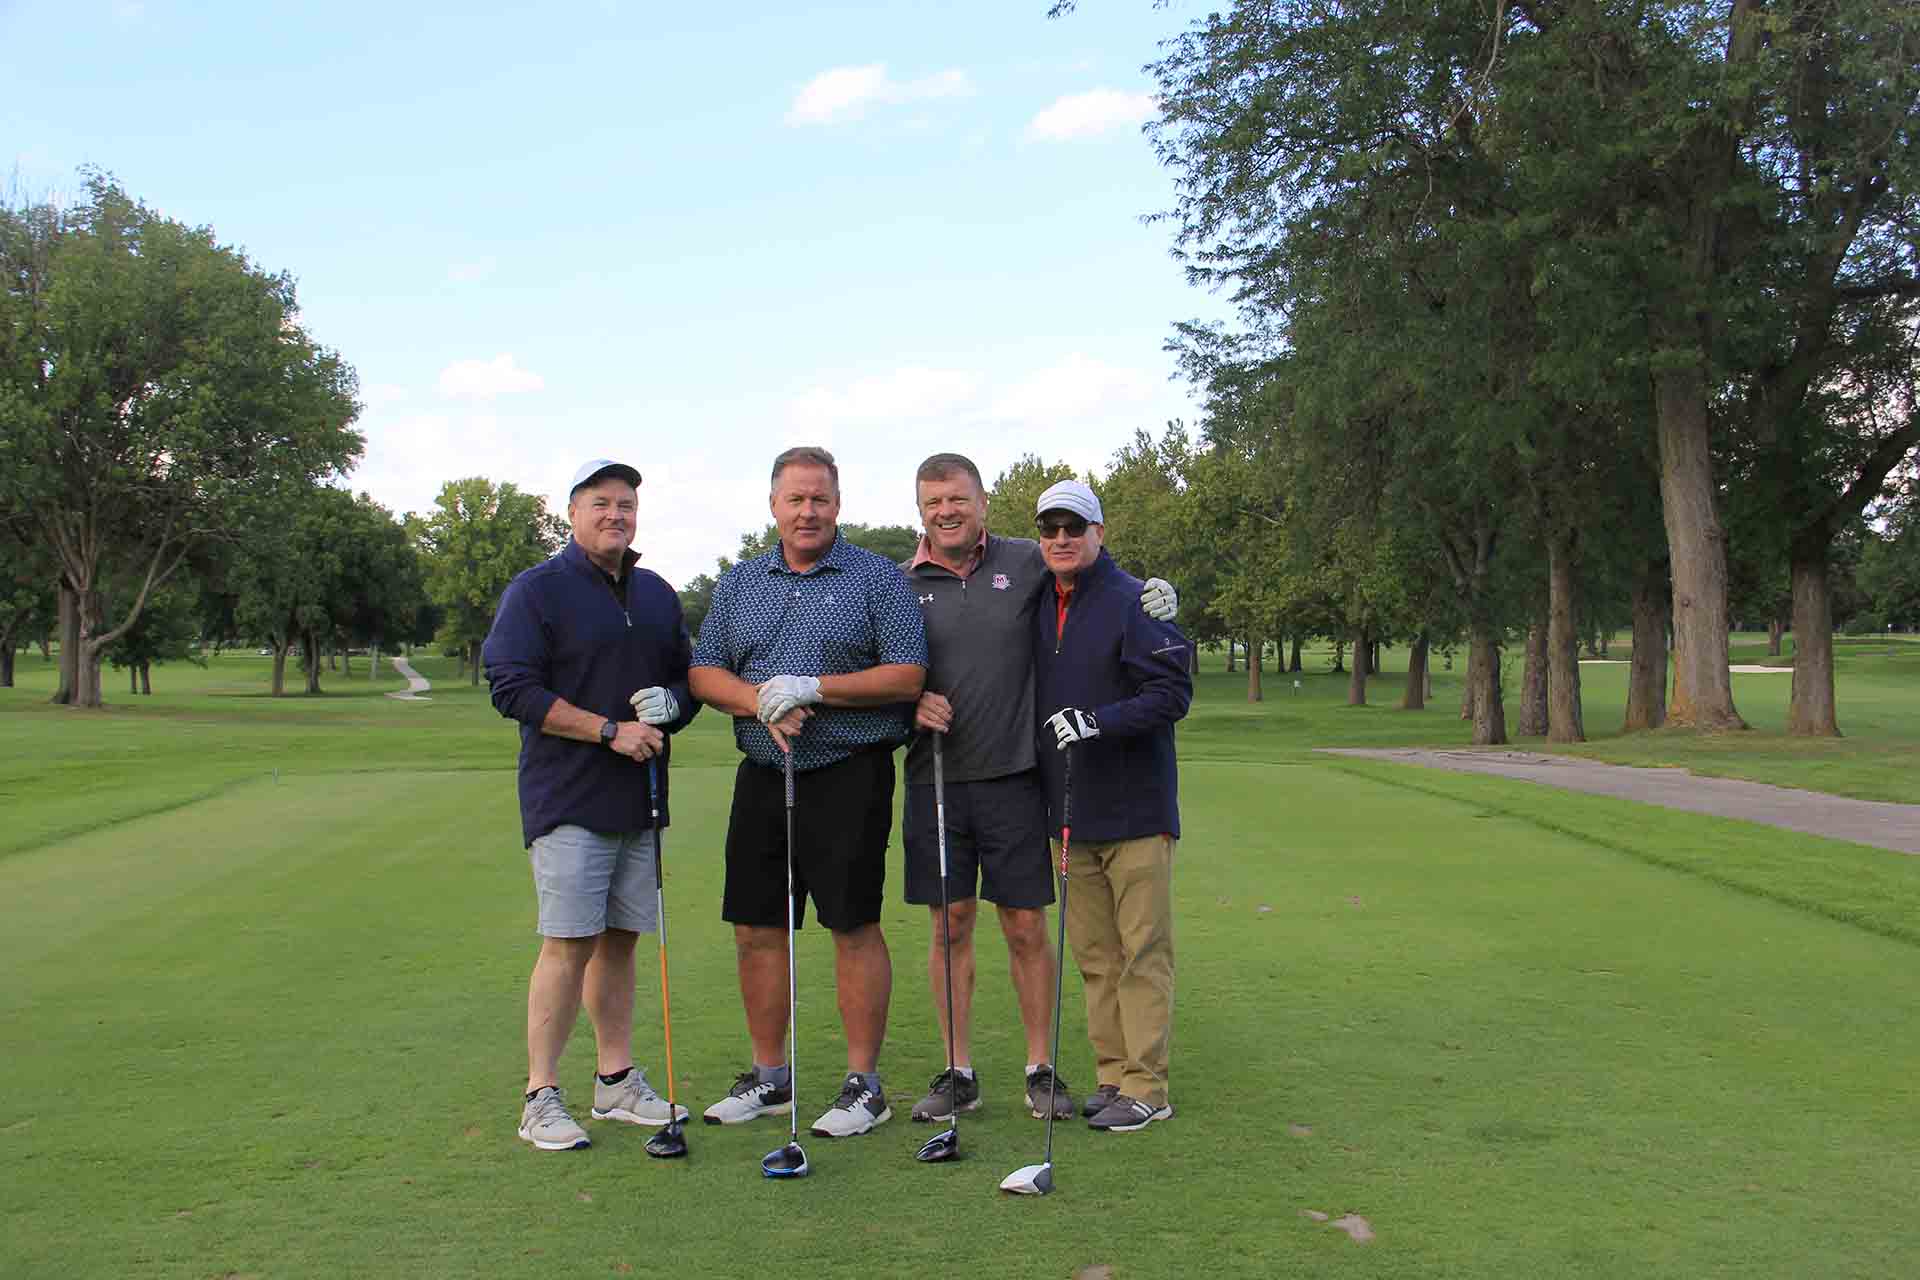 2022-Endowment-Golf-Classic-four-golfers-smile-for-picture